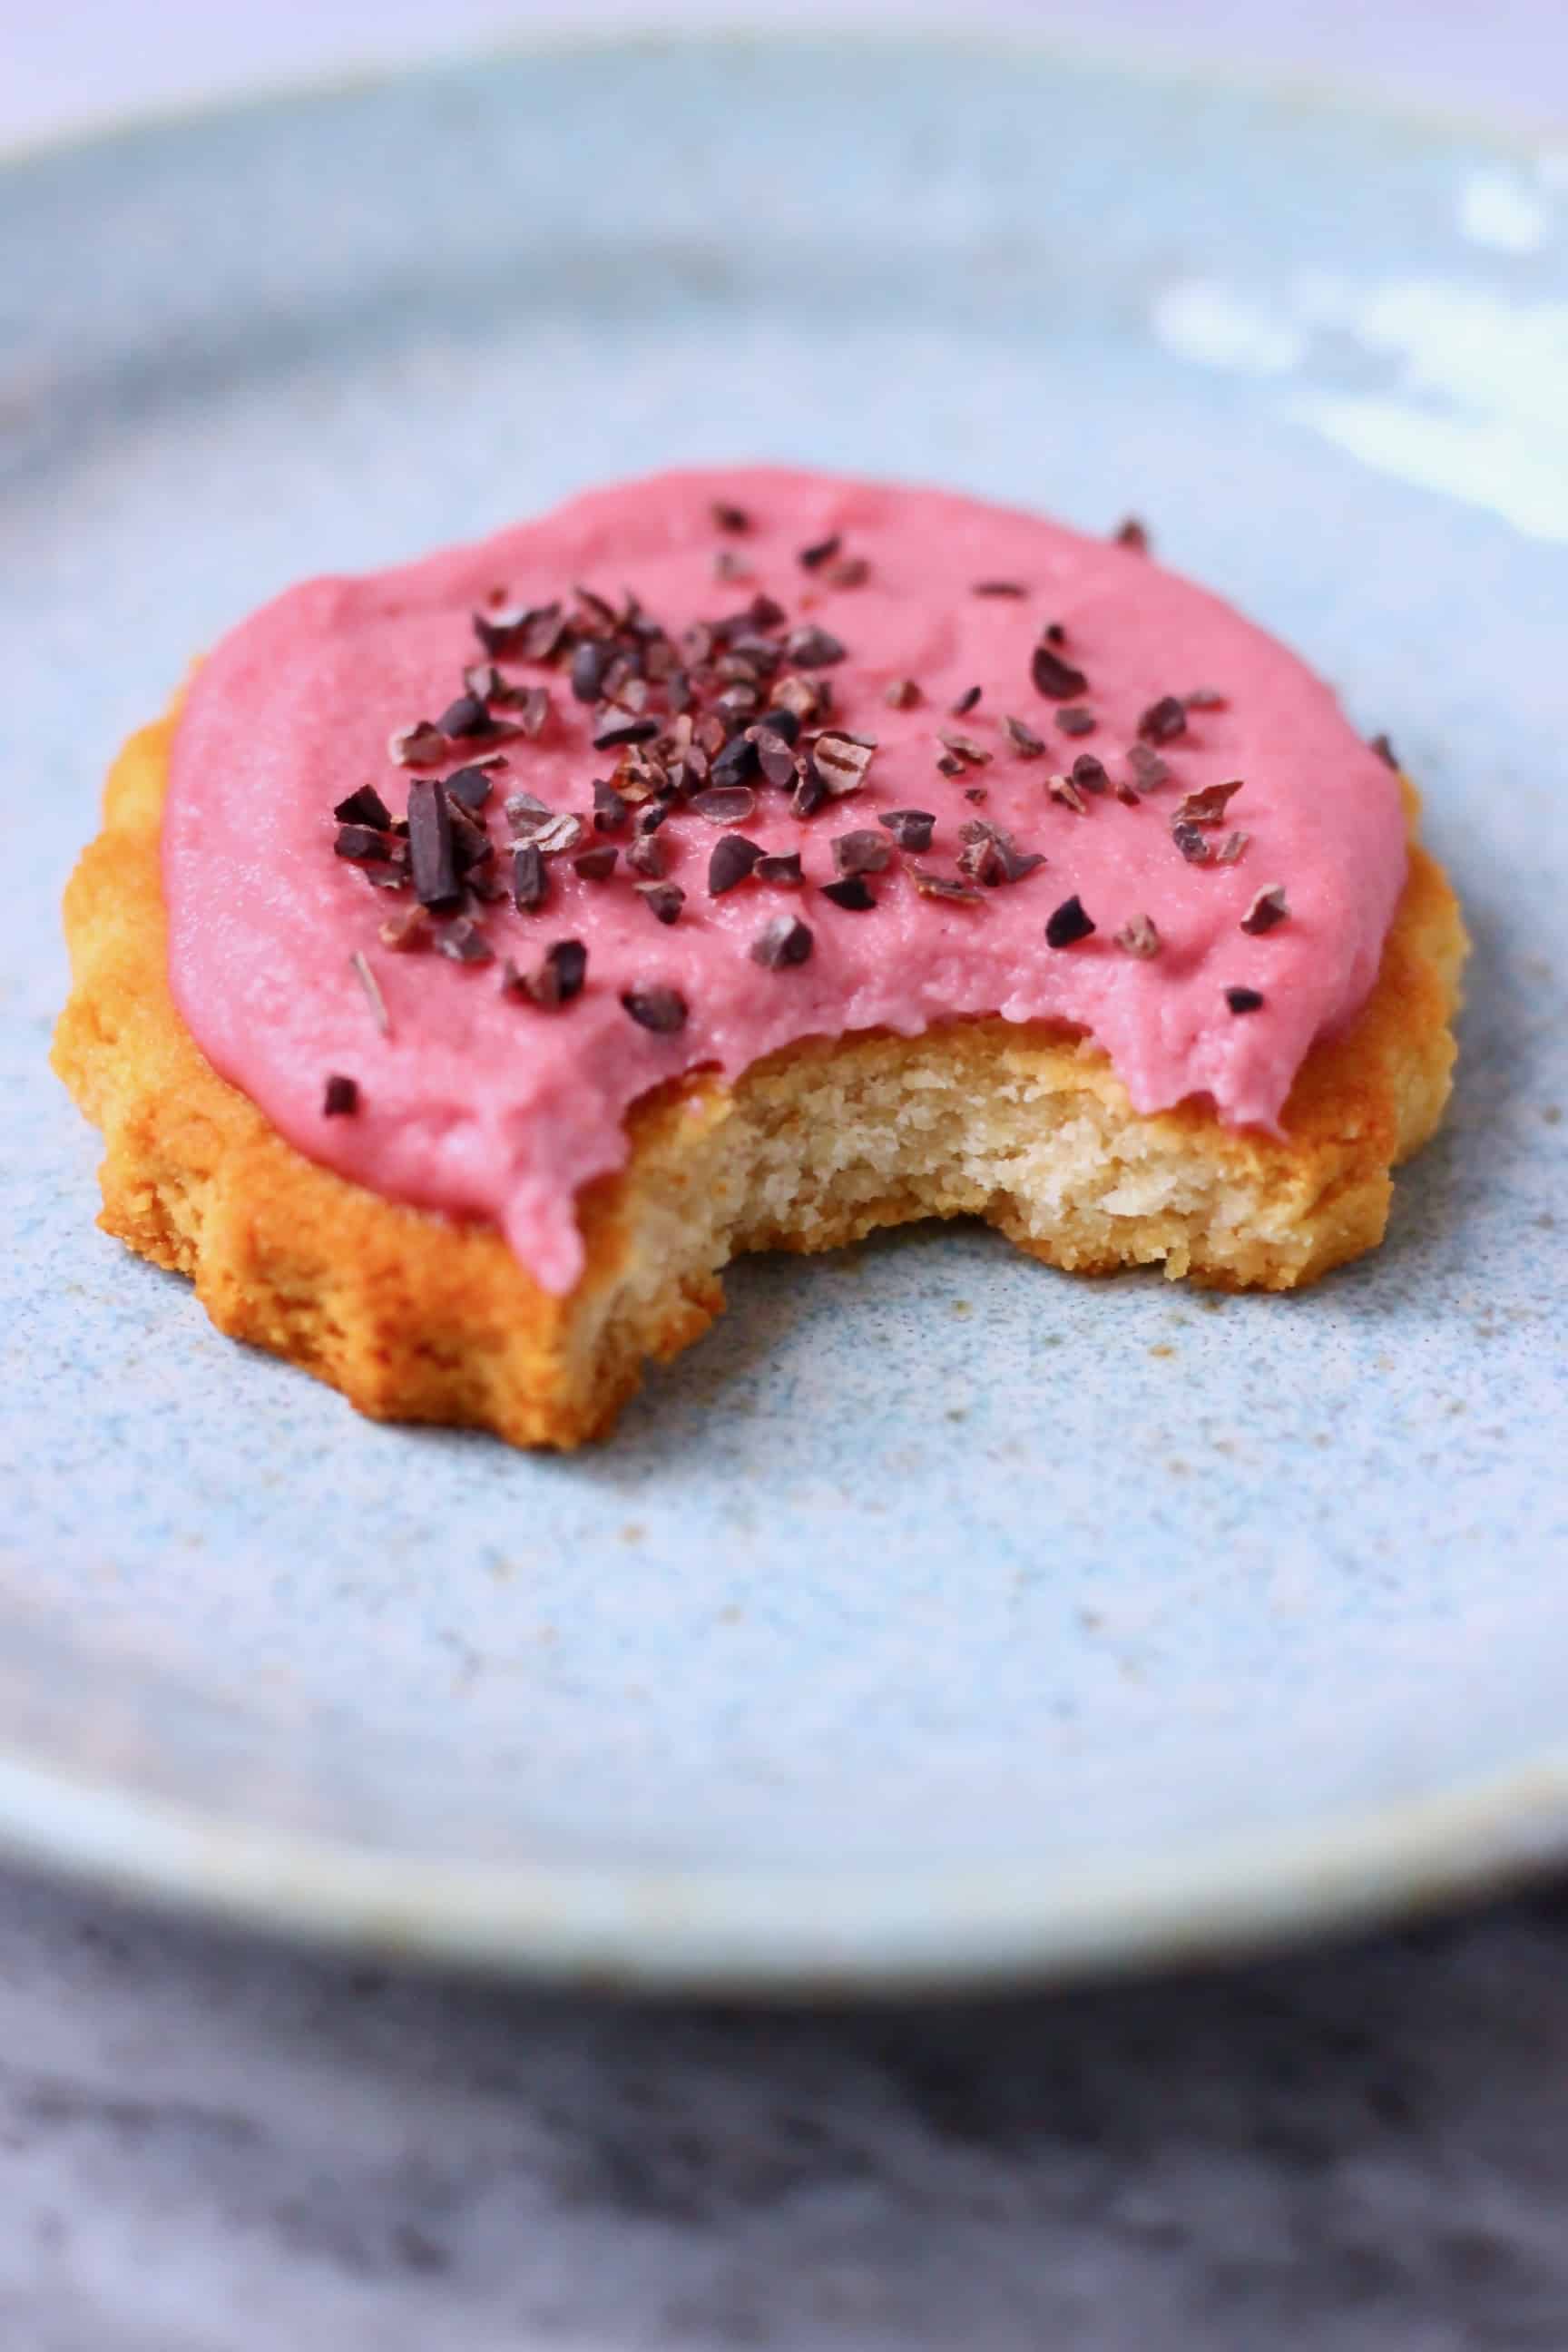 A gluten-free vegan sugar cookie topped with pink frosting and brown cacao nibs with a bite taken out of it on a plate